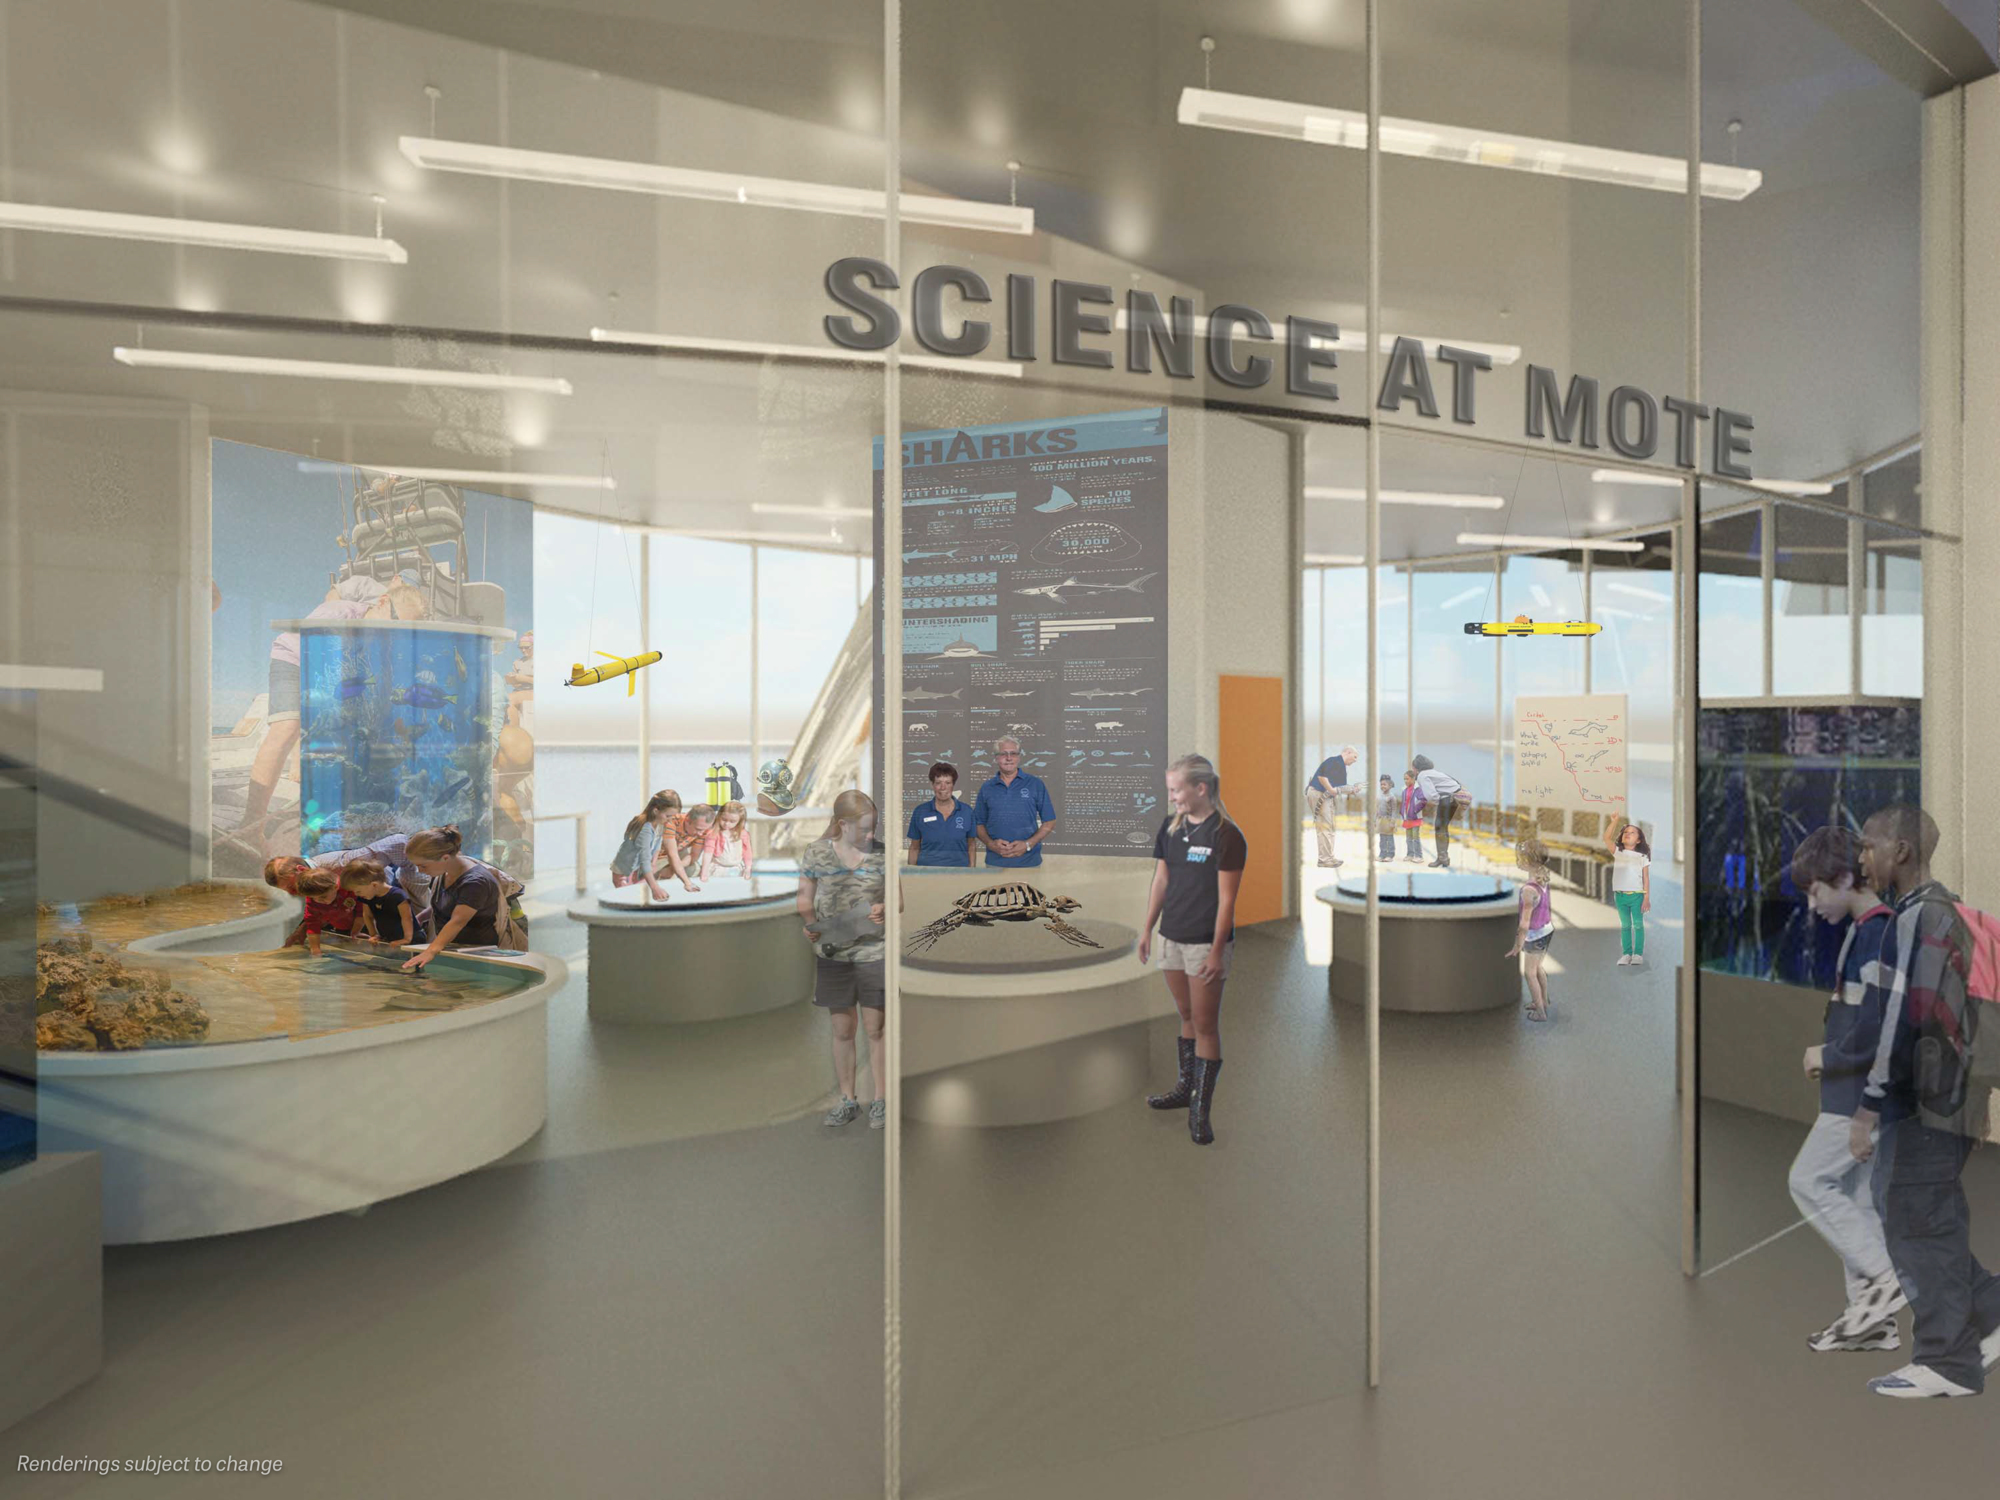  A rendering of a proposed teaching lab at the new facility. Photo courtesy of Mote.